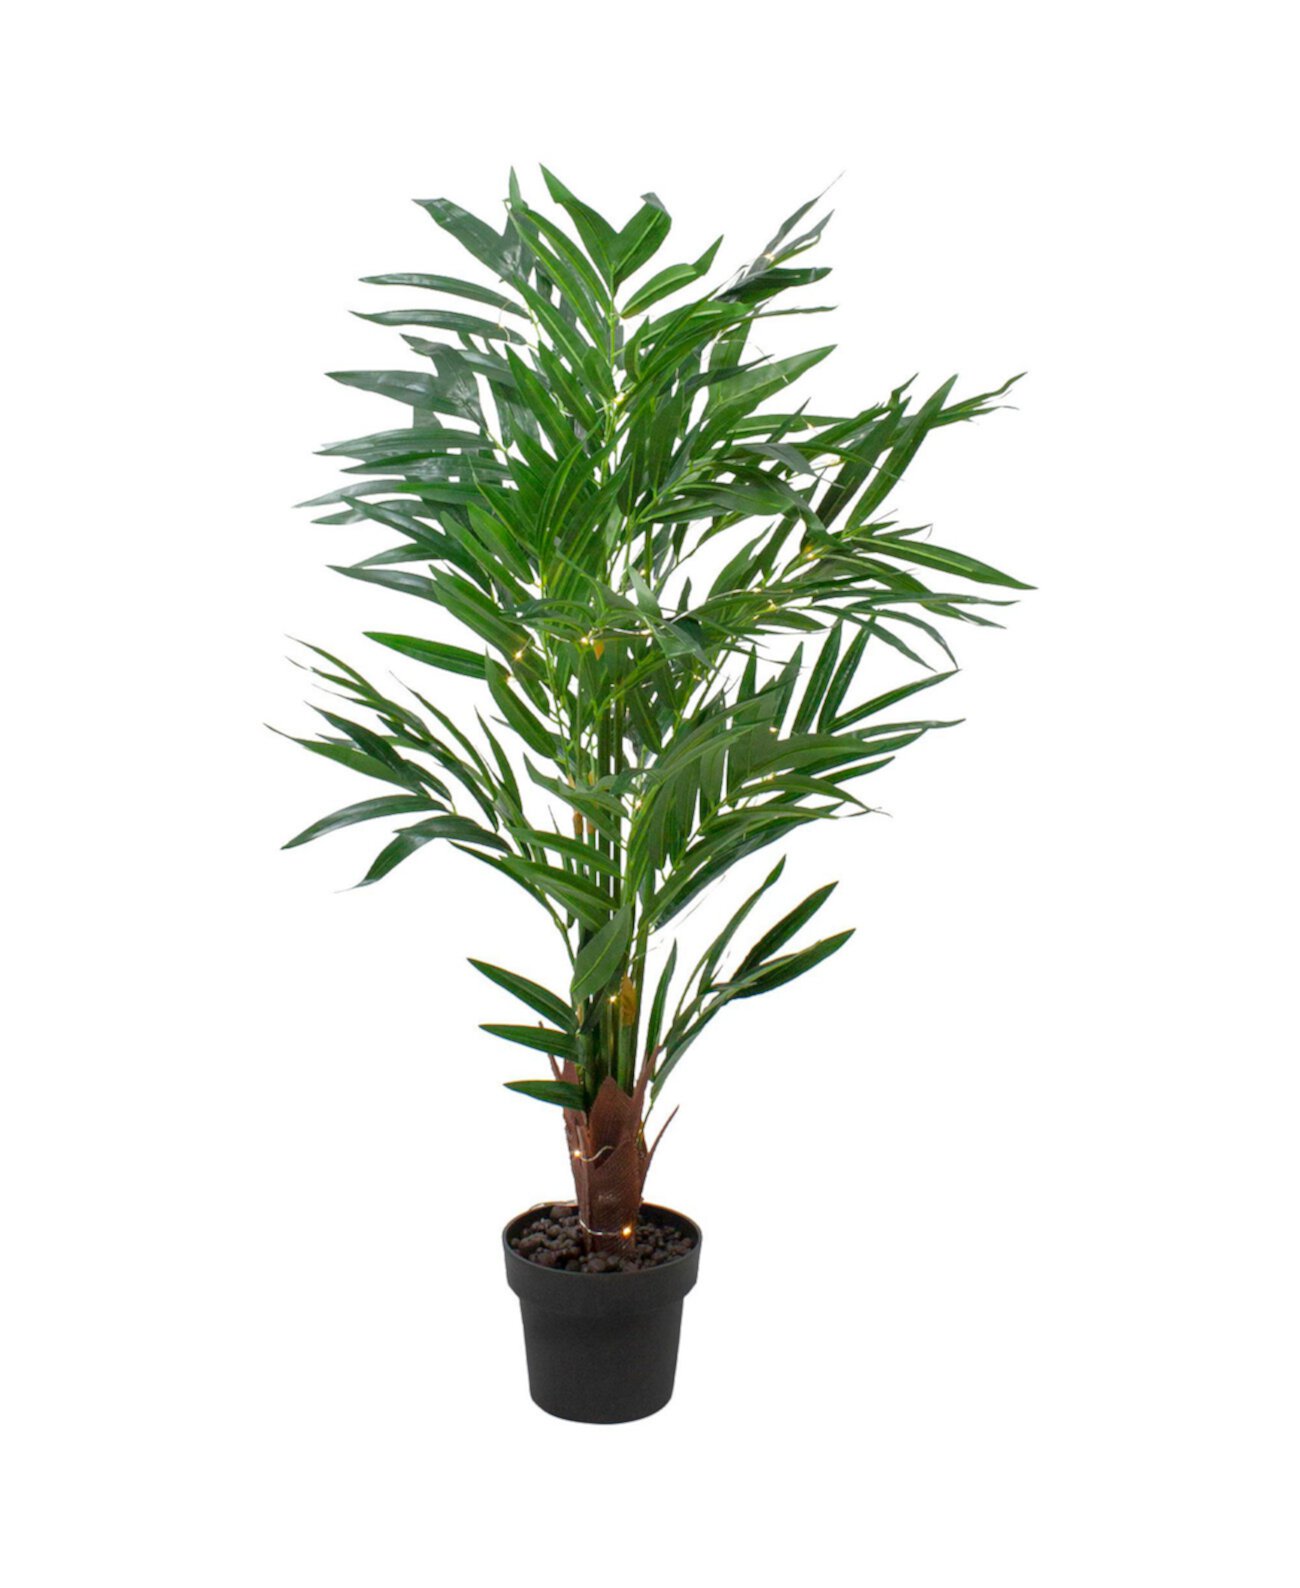 LED Lighted Potted Artificial Ravenea Palm Plant, 42" Northlight